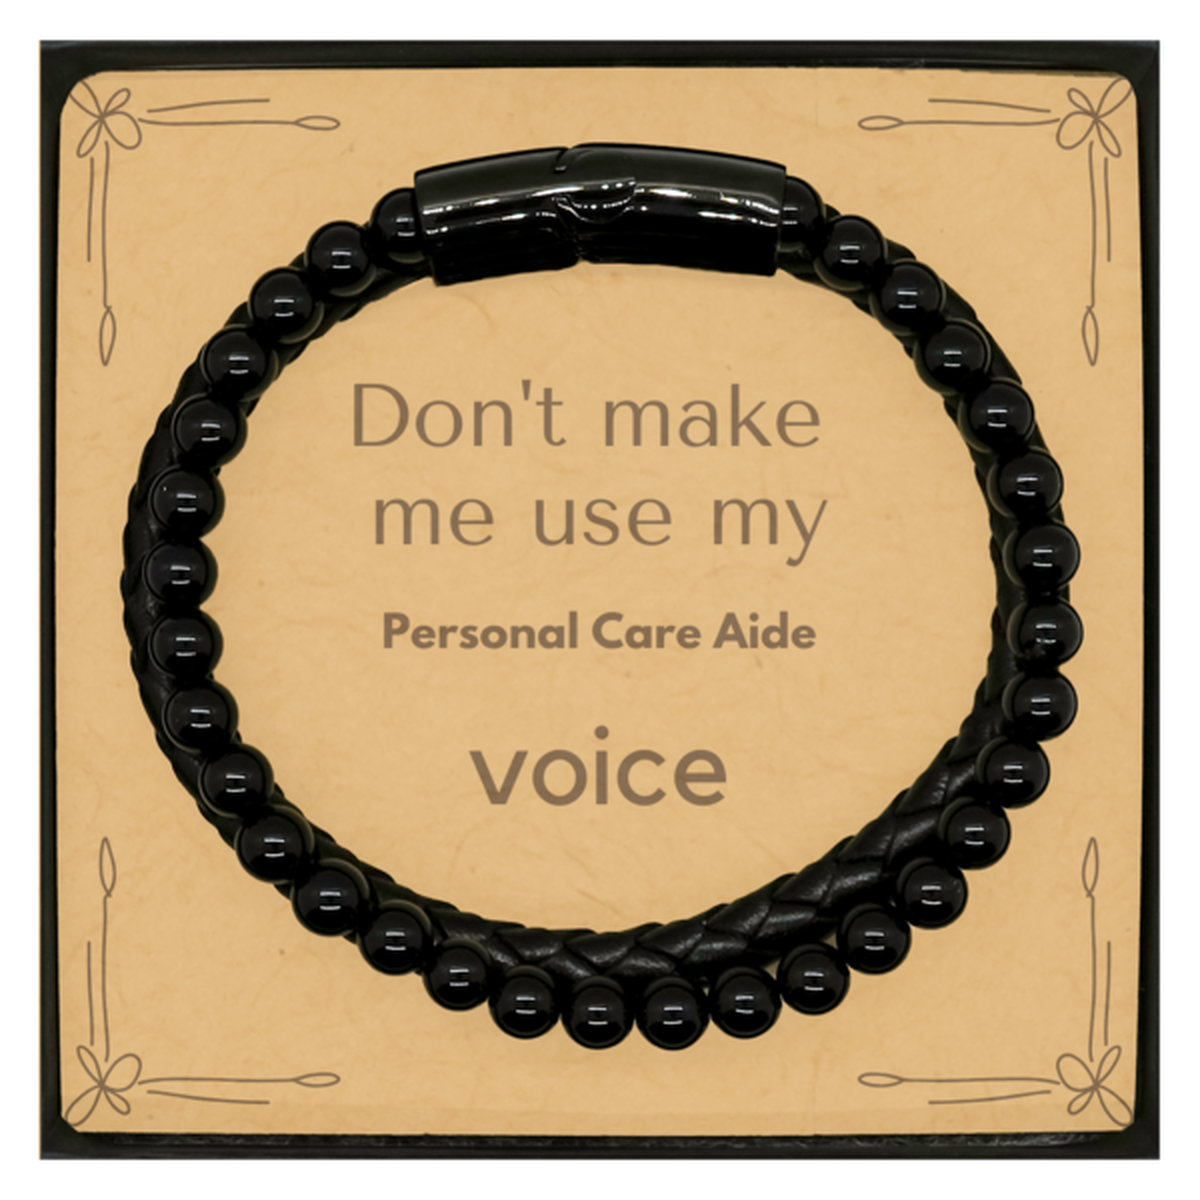 Don't make me use my Personal Care Aide voice, Sarcasm Personal Care Aide Card Gifts, Christmas Personal Care Aide Stone Leather Bracelets Birthday Unique Gifts For Personal Care Aide Coworkers, Men, Women, Colleague, Friends